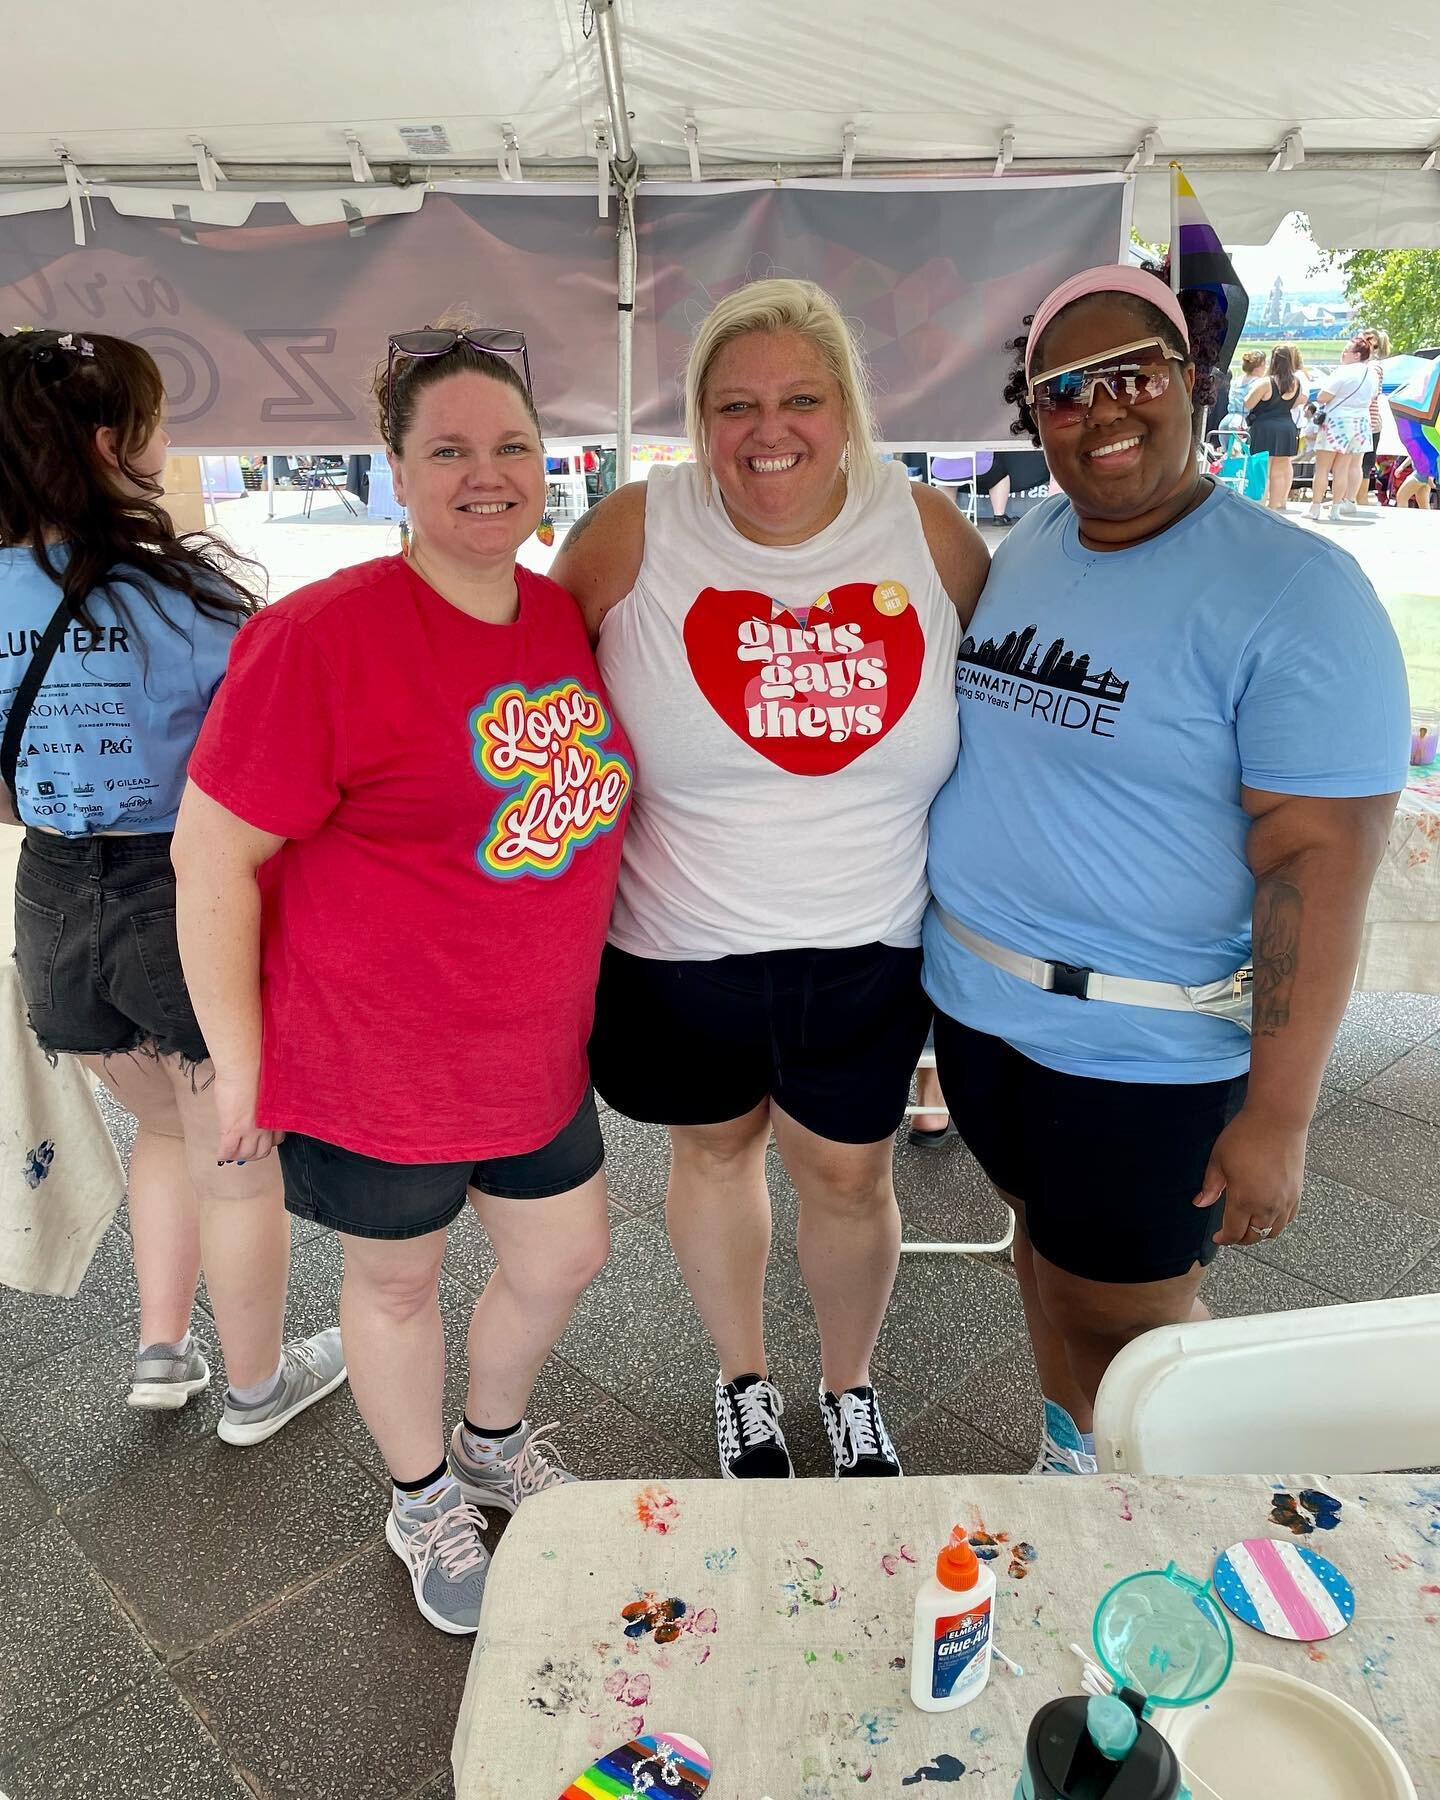 Today was so beautiful (&amp; hot 🥵) and our team had the best time volunteering at Cincinnati Pride! 

It was such an honor to share space with so many beautiful people in our city today 🏳️&zwj;🌈 We are already looking forward to next year! 

#ci